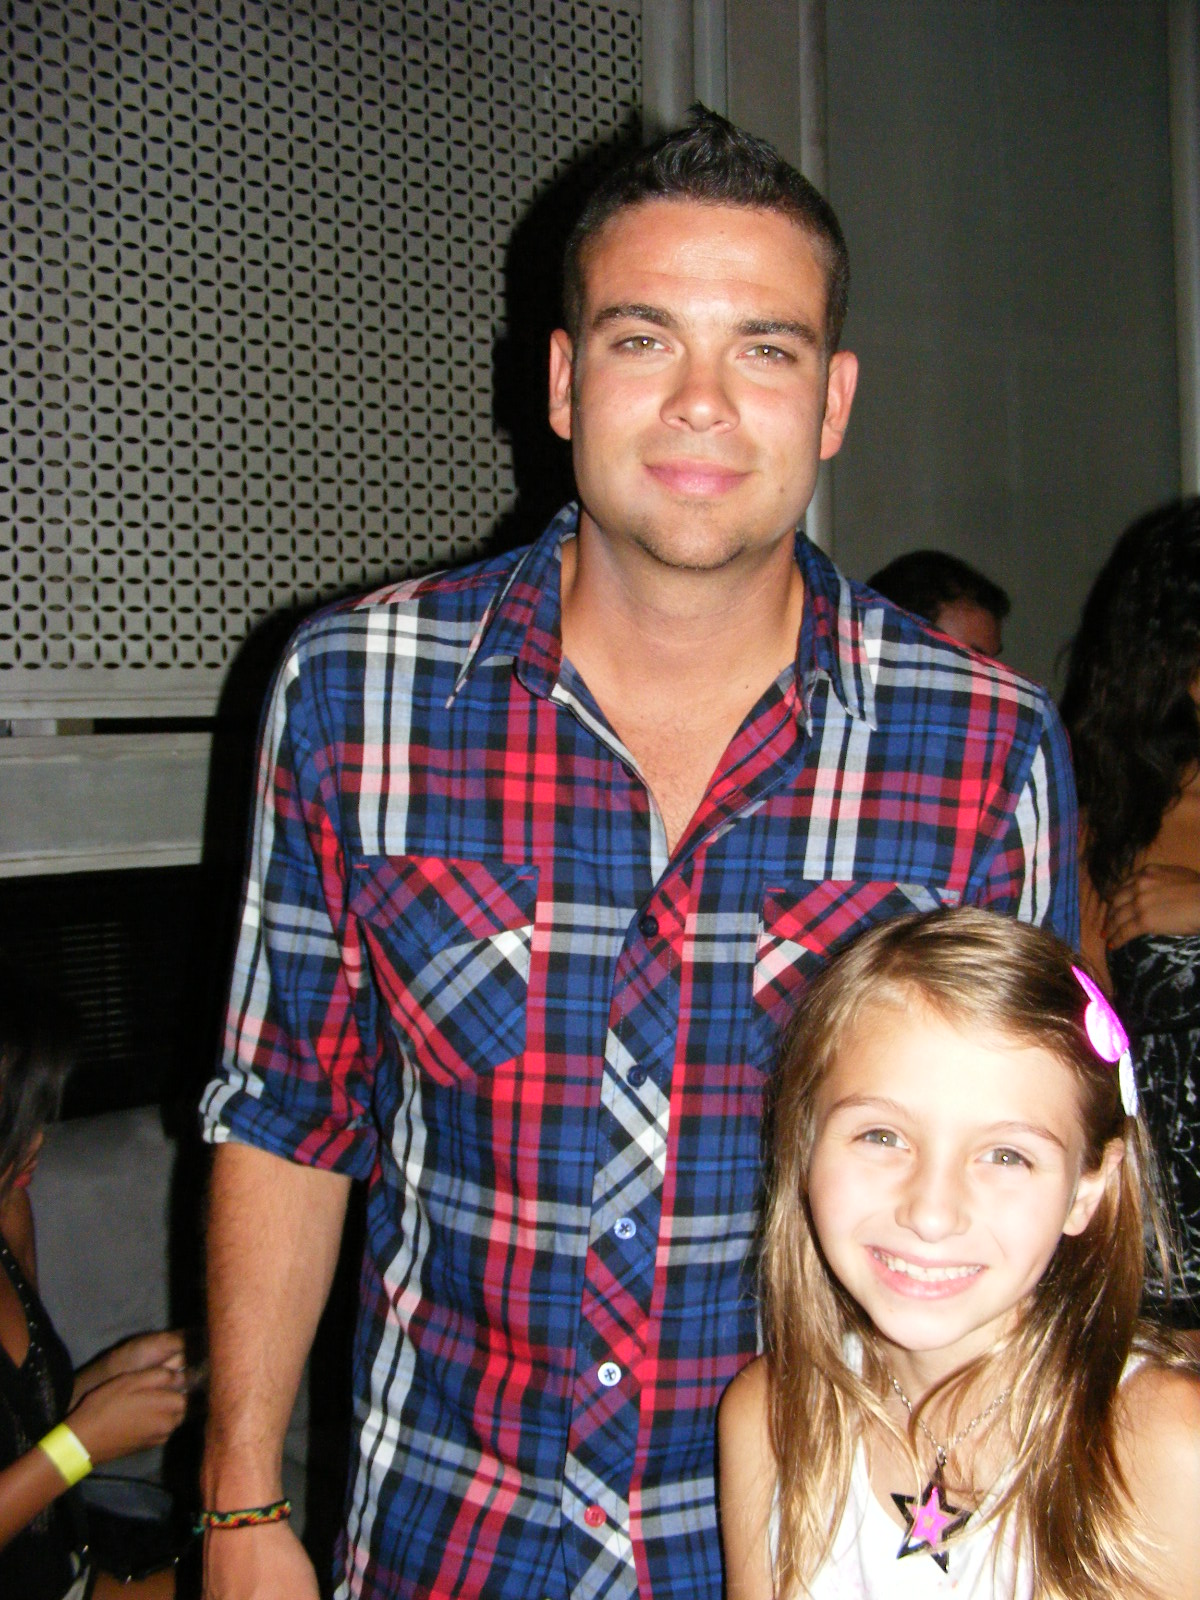 Sophia Strauss with Mark Salling from Glee